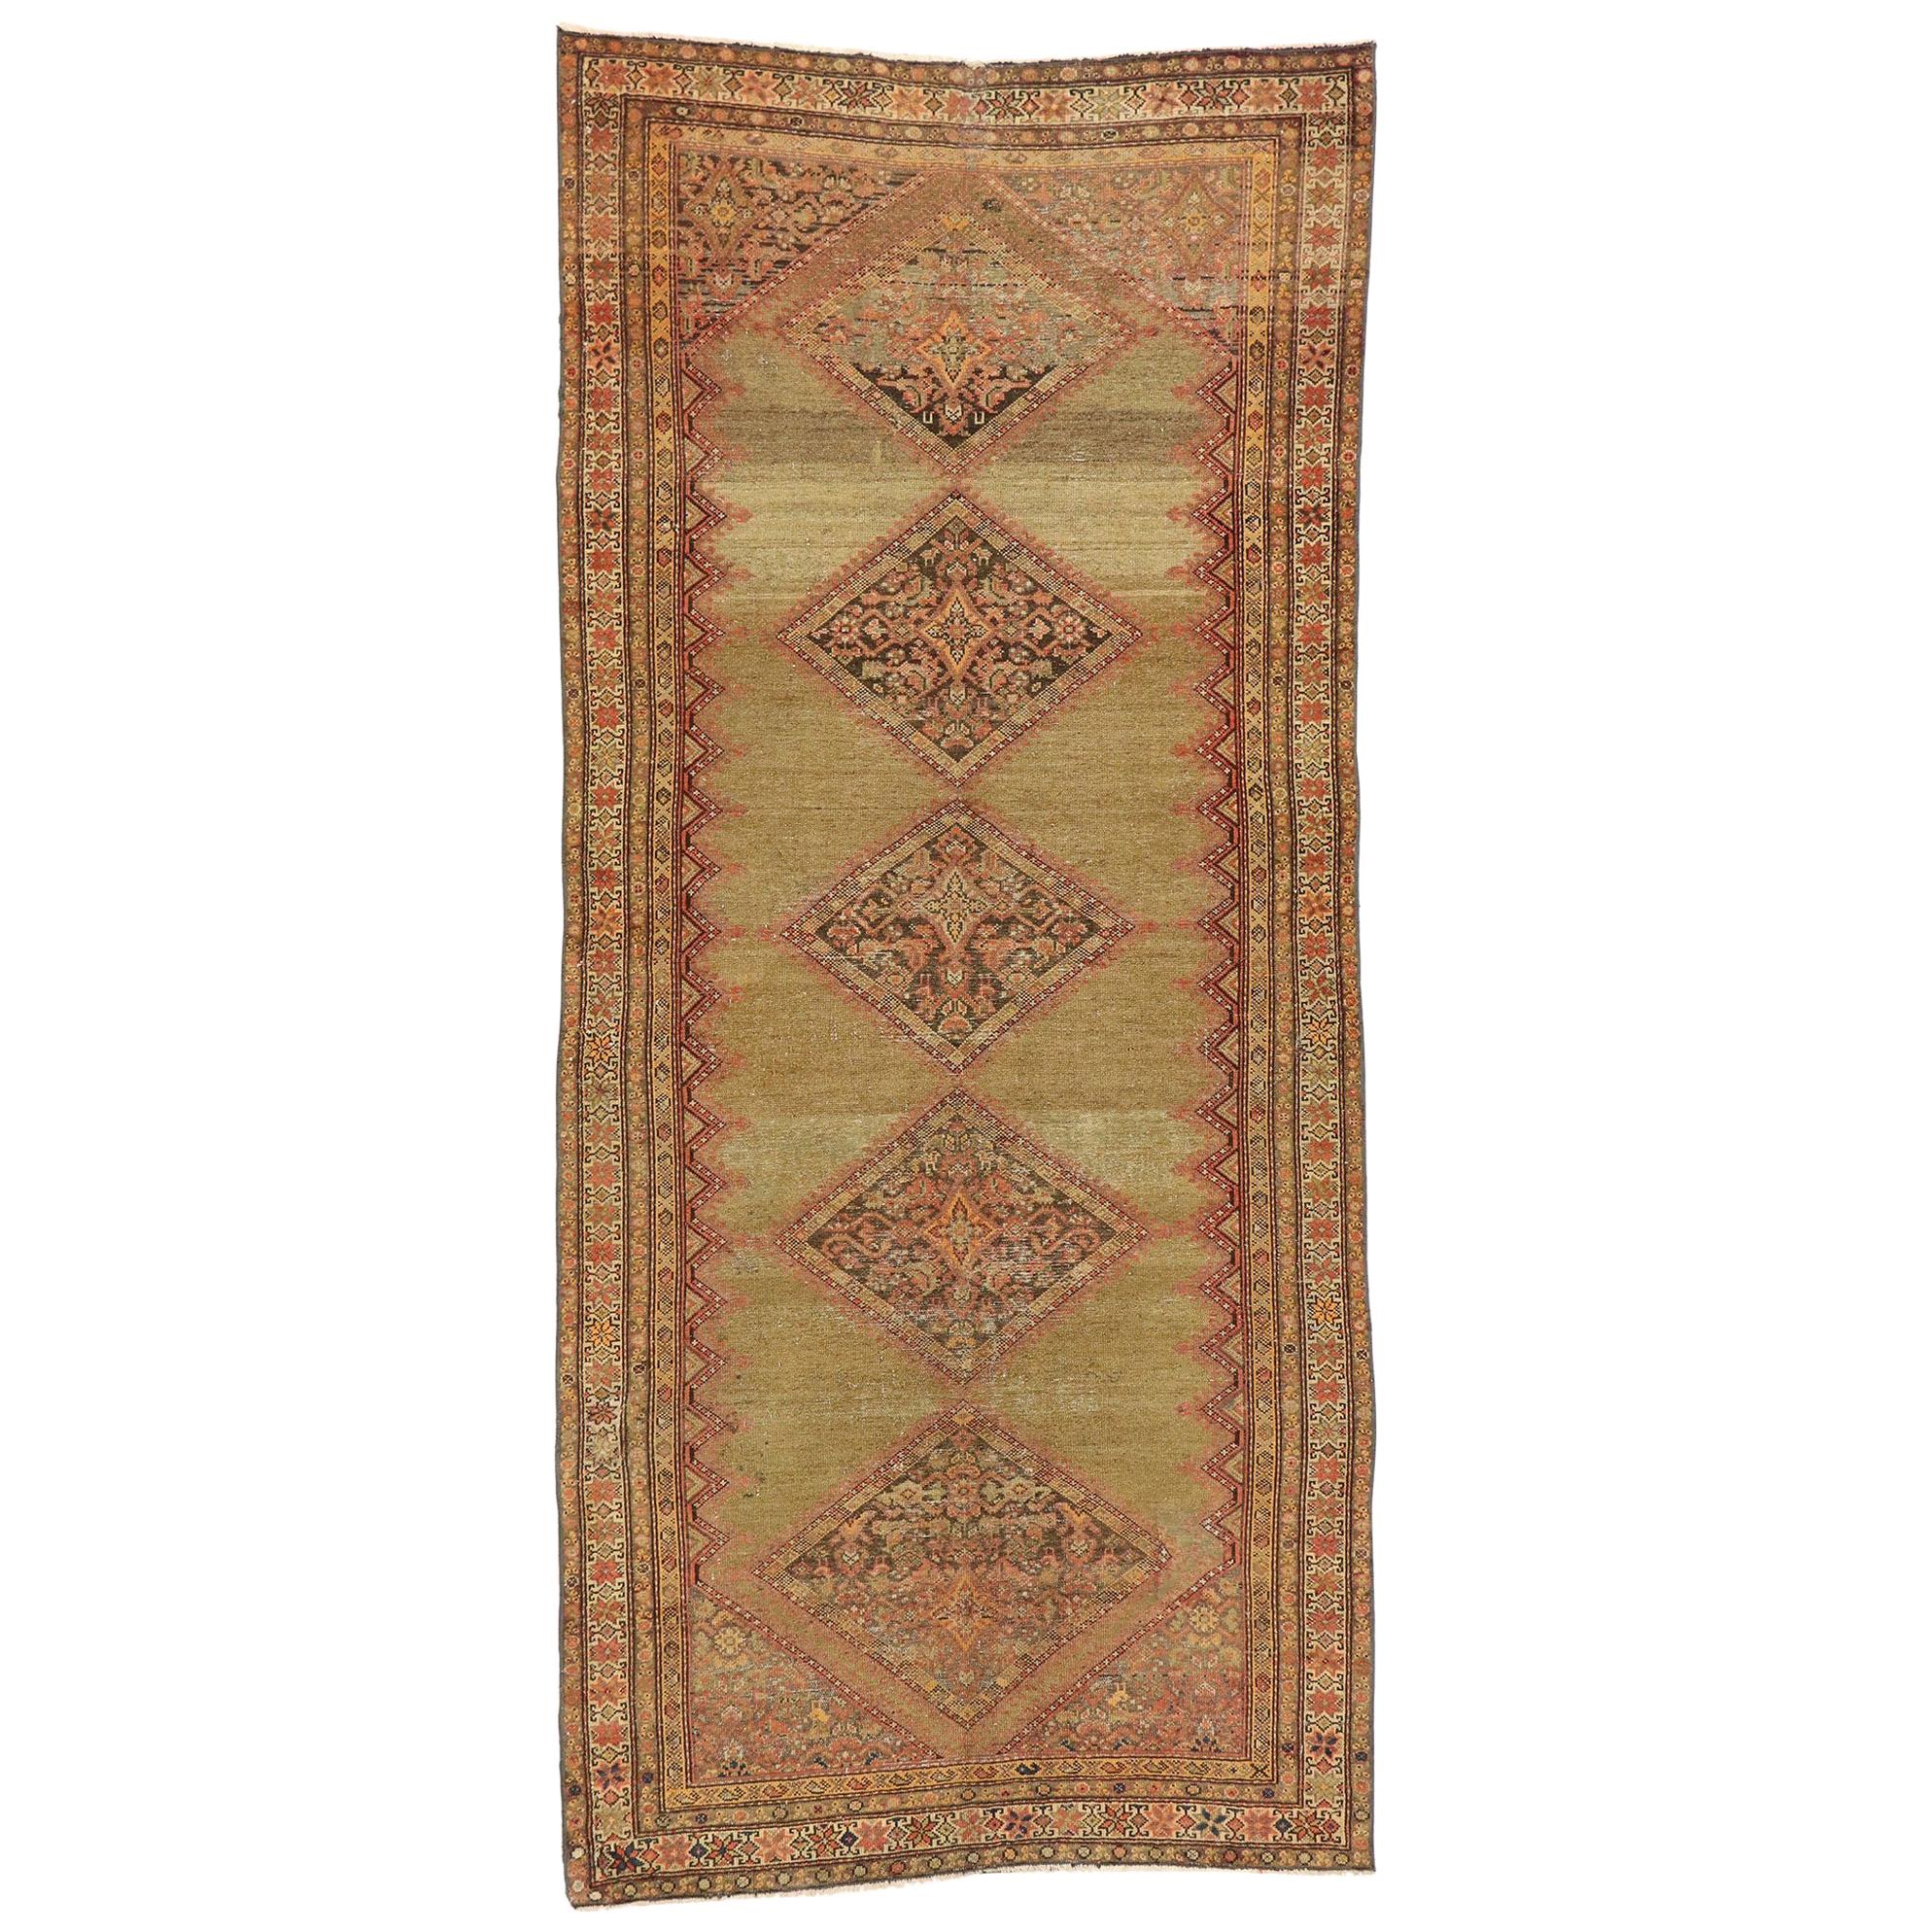 Antique Persian Malayer Rug Runner with Rustic Mediterranean Style